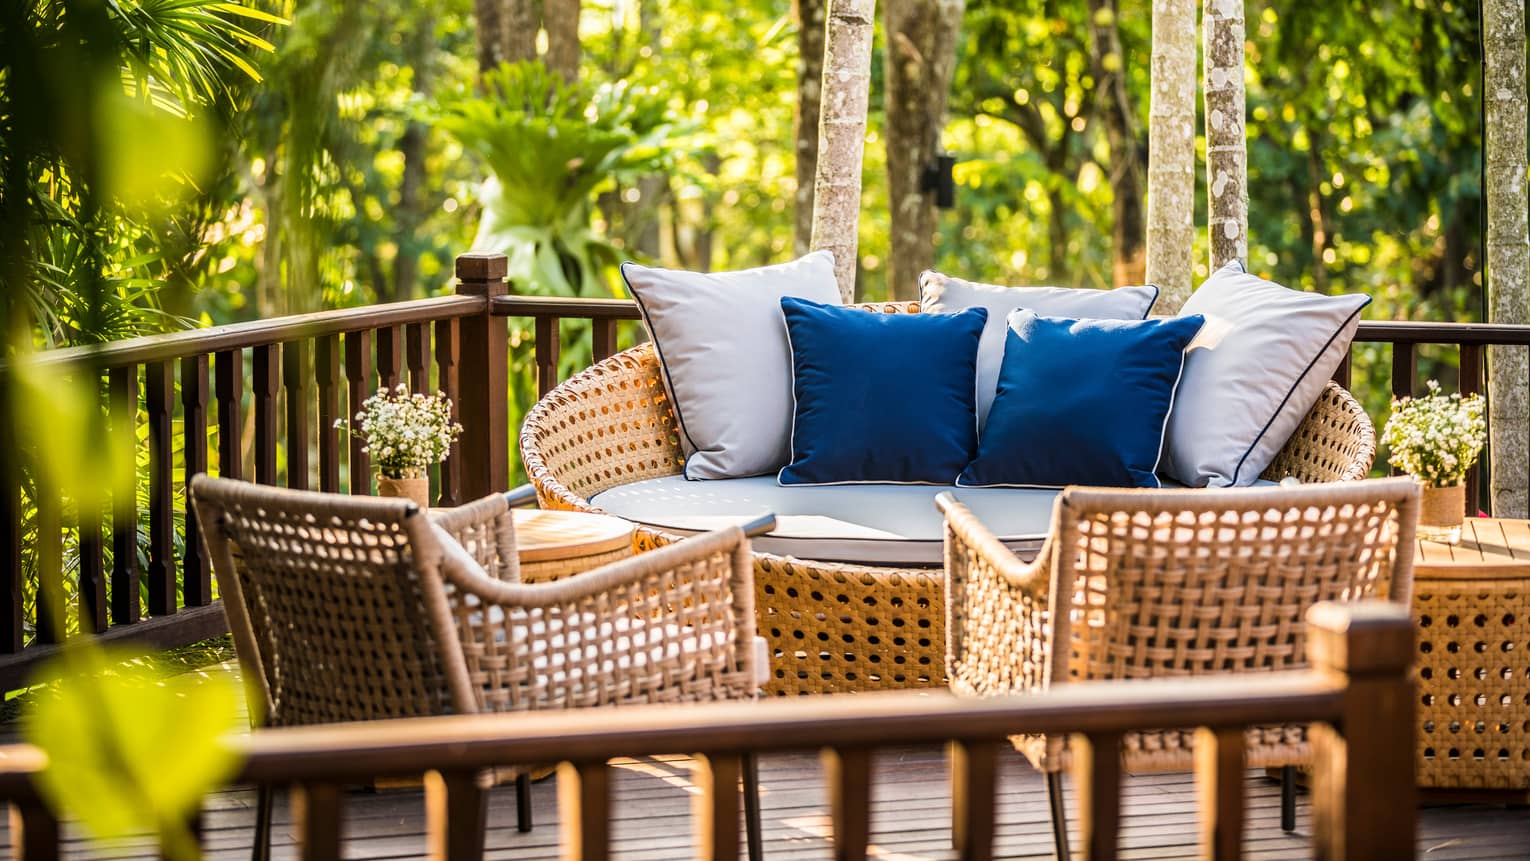 Wicker loveseat with white and blue cushions across from chairs on patio